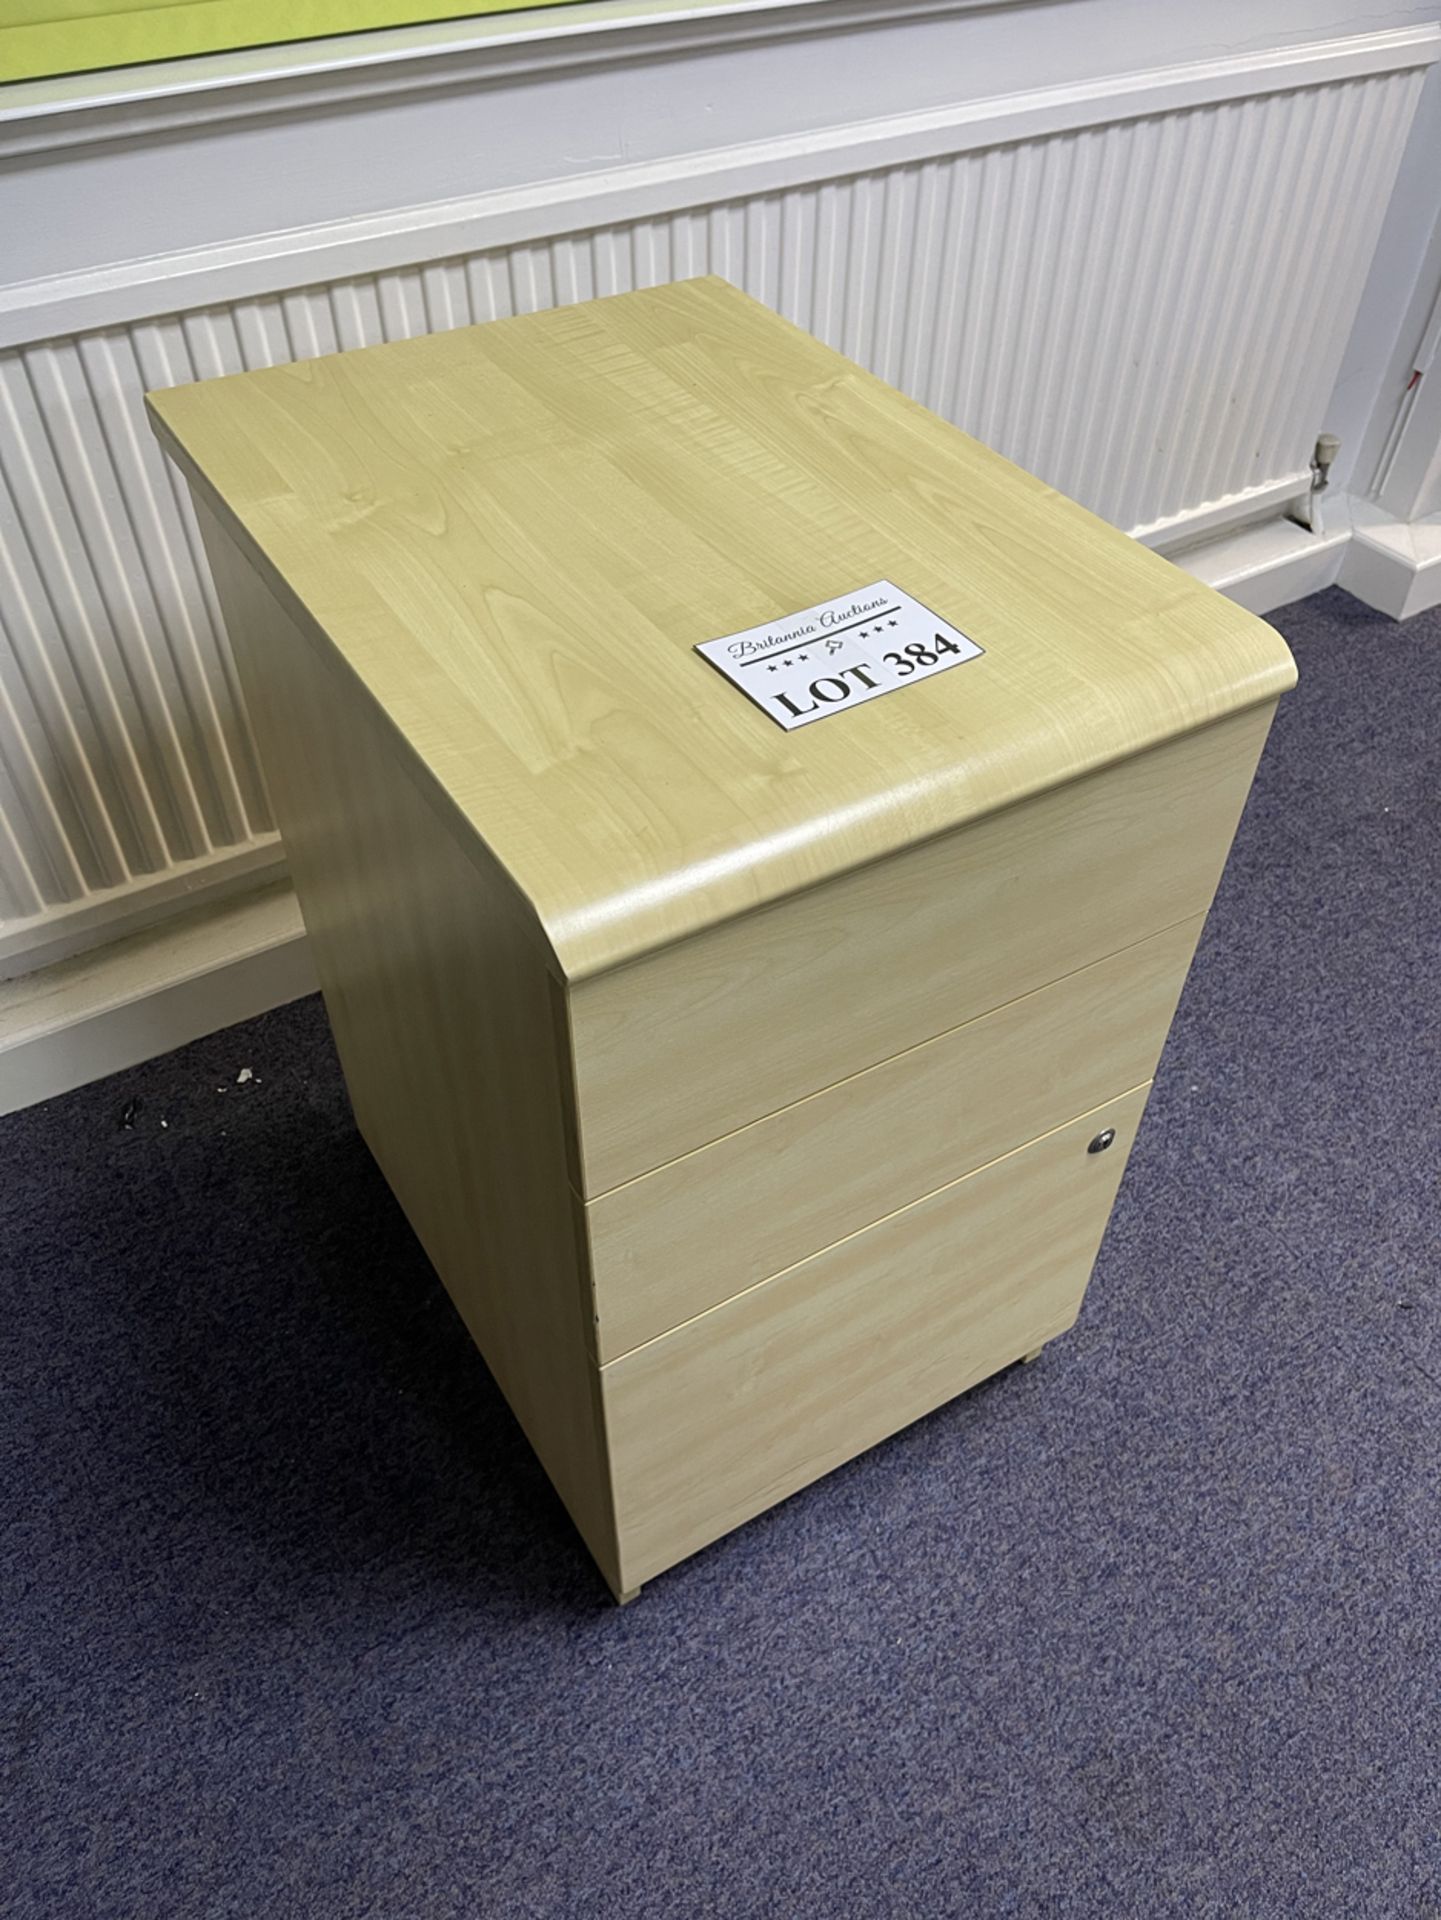 Set of Office Drawers. Dimensions 430mm x 600mm x 730mm High Approx. - Image 2 of 2